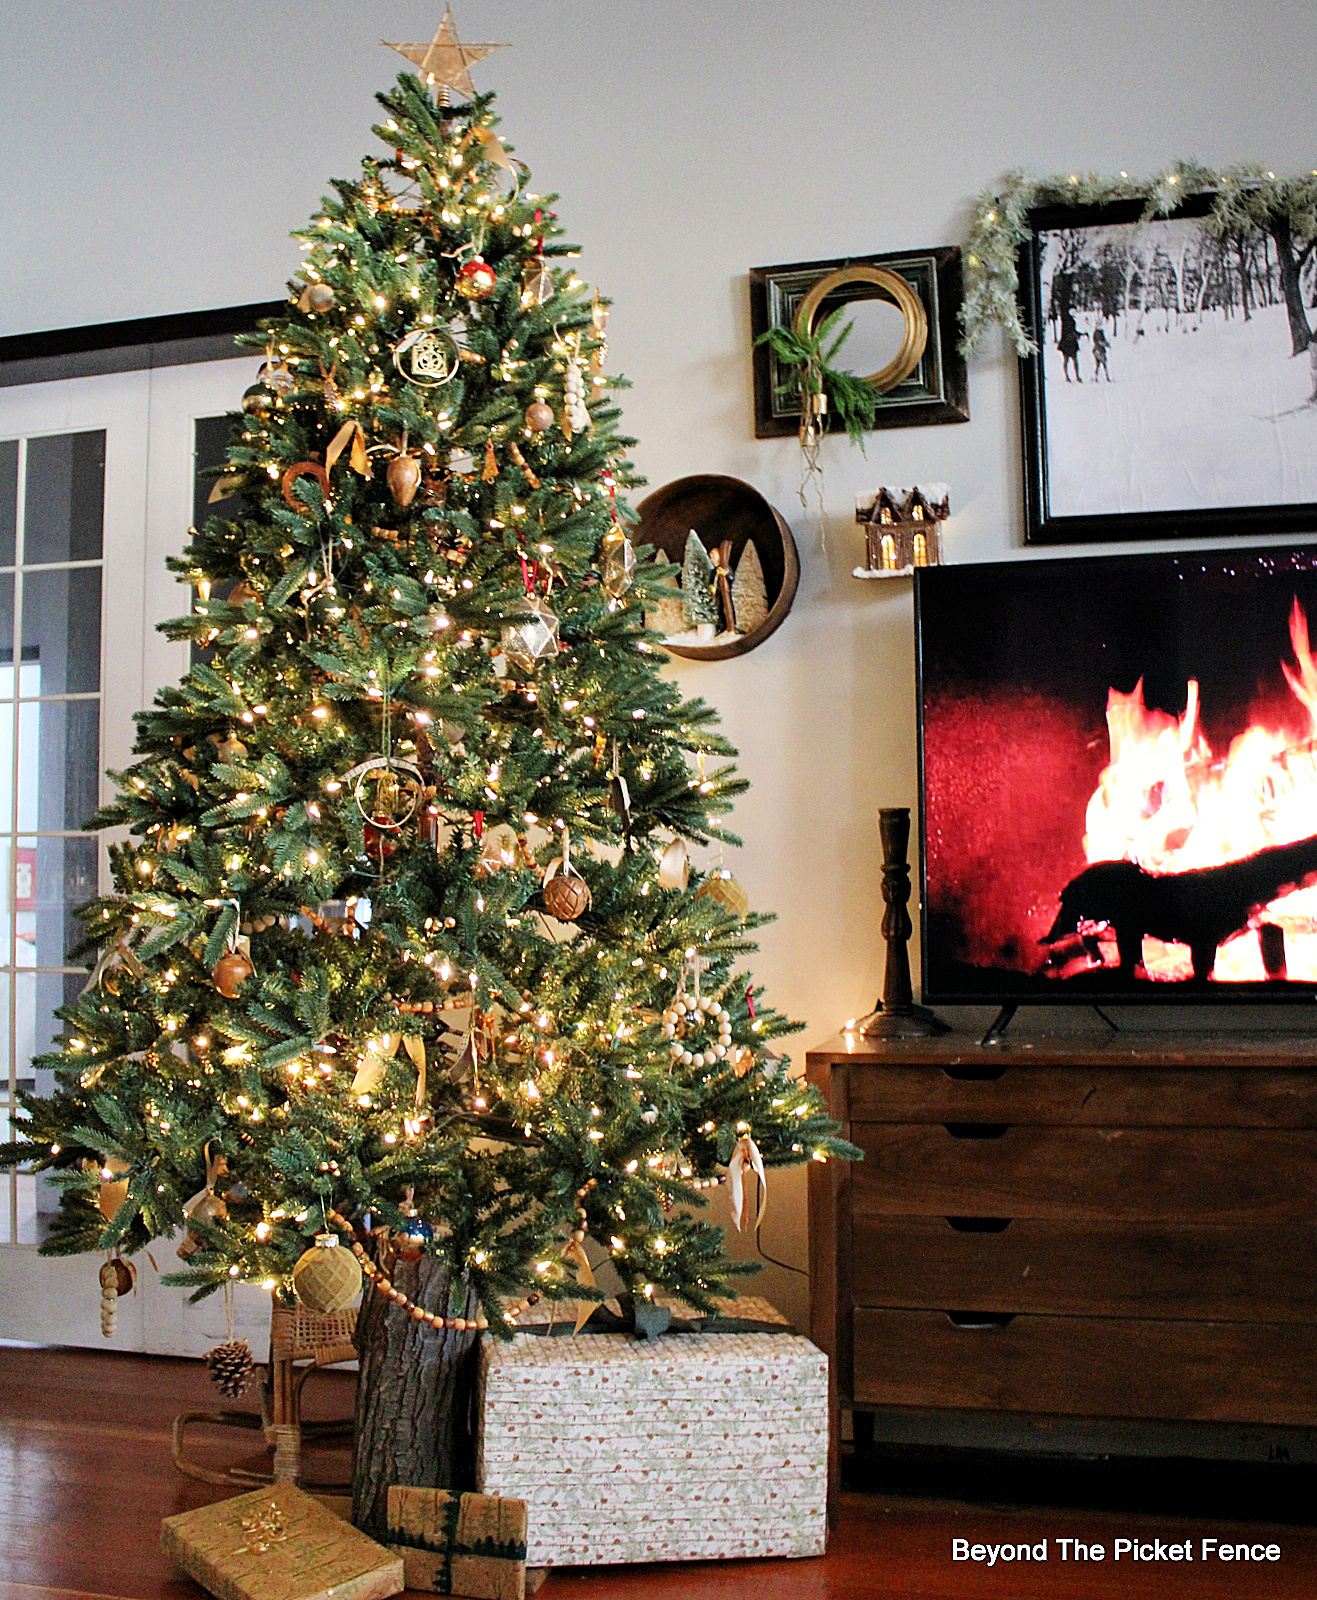 Beyond The Picket Fence: Warm Golden Christmas Tree